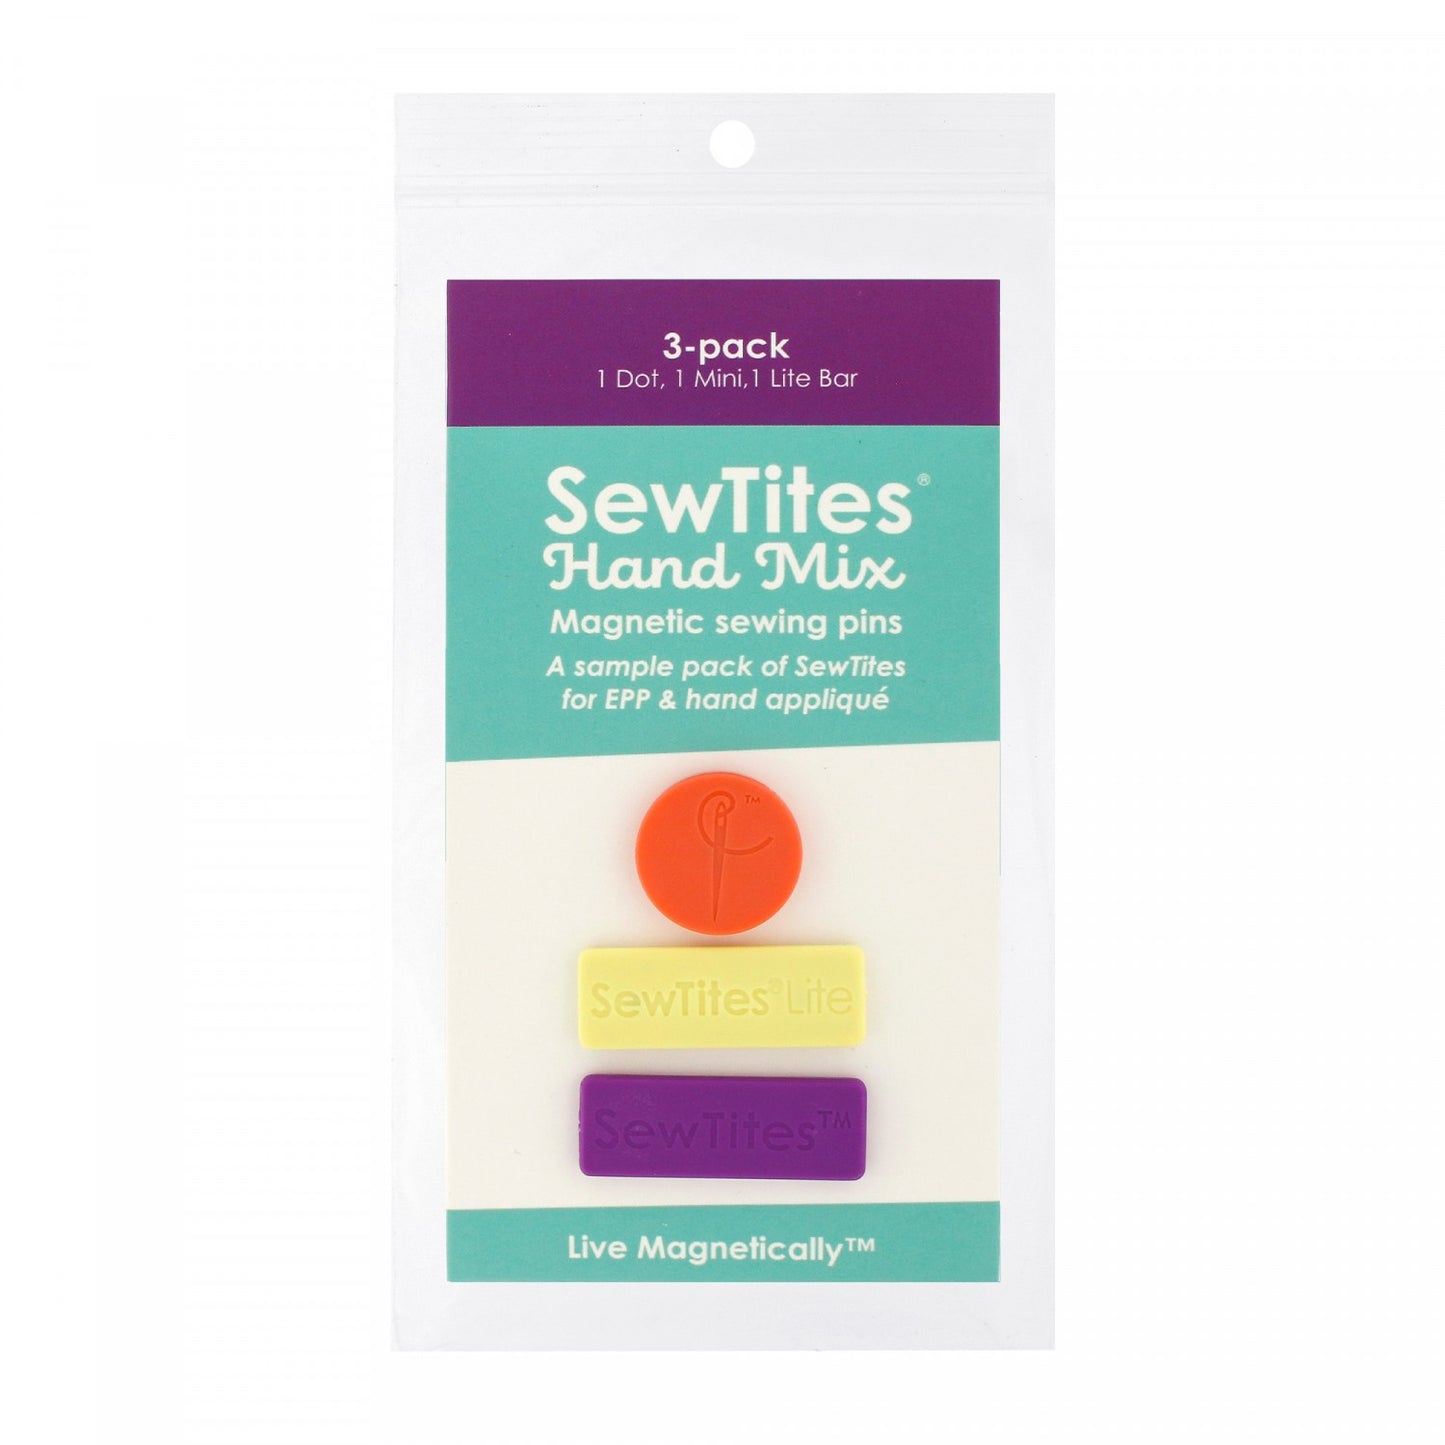 The SewTites Hand Mix packs contain a combination of models for hand sewing, including EPP, wool applique, embroidery, and more – our Dots (in a new salmon color!), Minis, and Lite Bars.  The 3-pack is perfect a trial pack for those new to using SewTites.  SewTites Specs:  Dot - .67"" (17mm) diameter with one very strong large magnet on back Lite Bar - 1.25"" x .5"" (32 x 12 mm) with two lighter strength magnets on back Mini - 1.25"" x .5"" (32 x 12 mm) with two strong magnets on back  